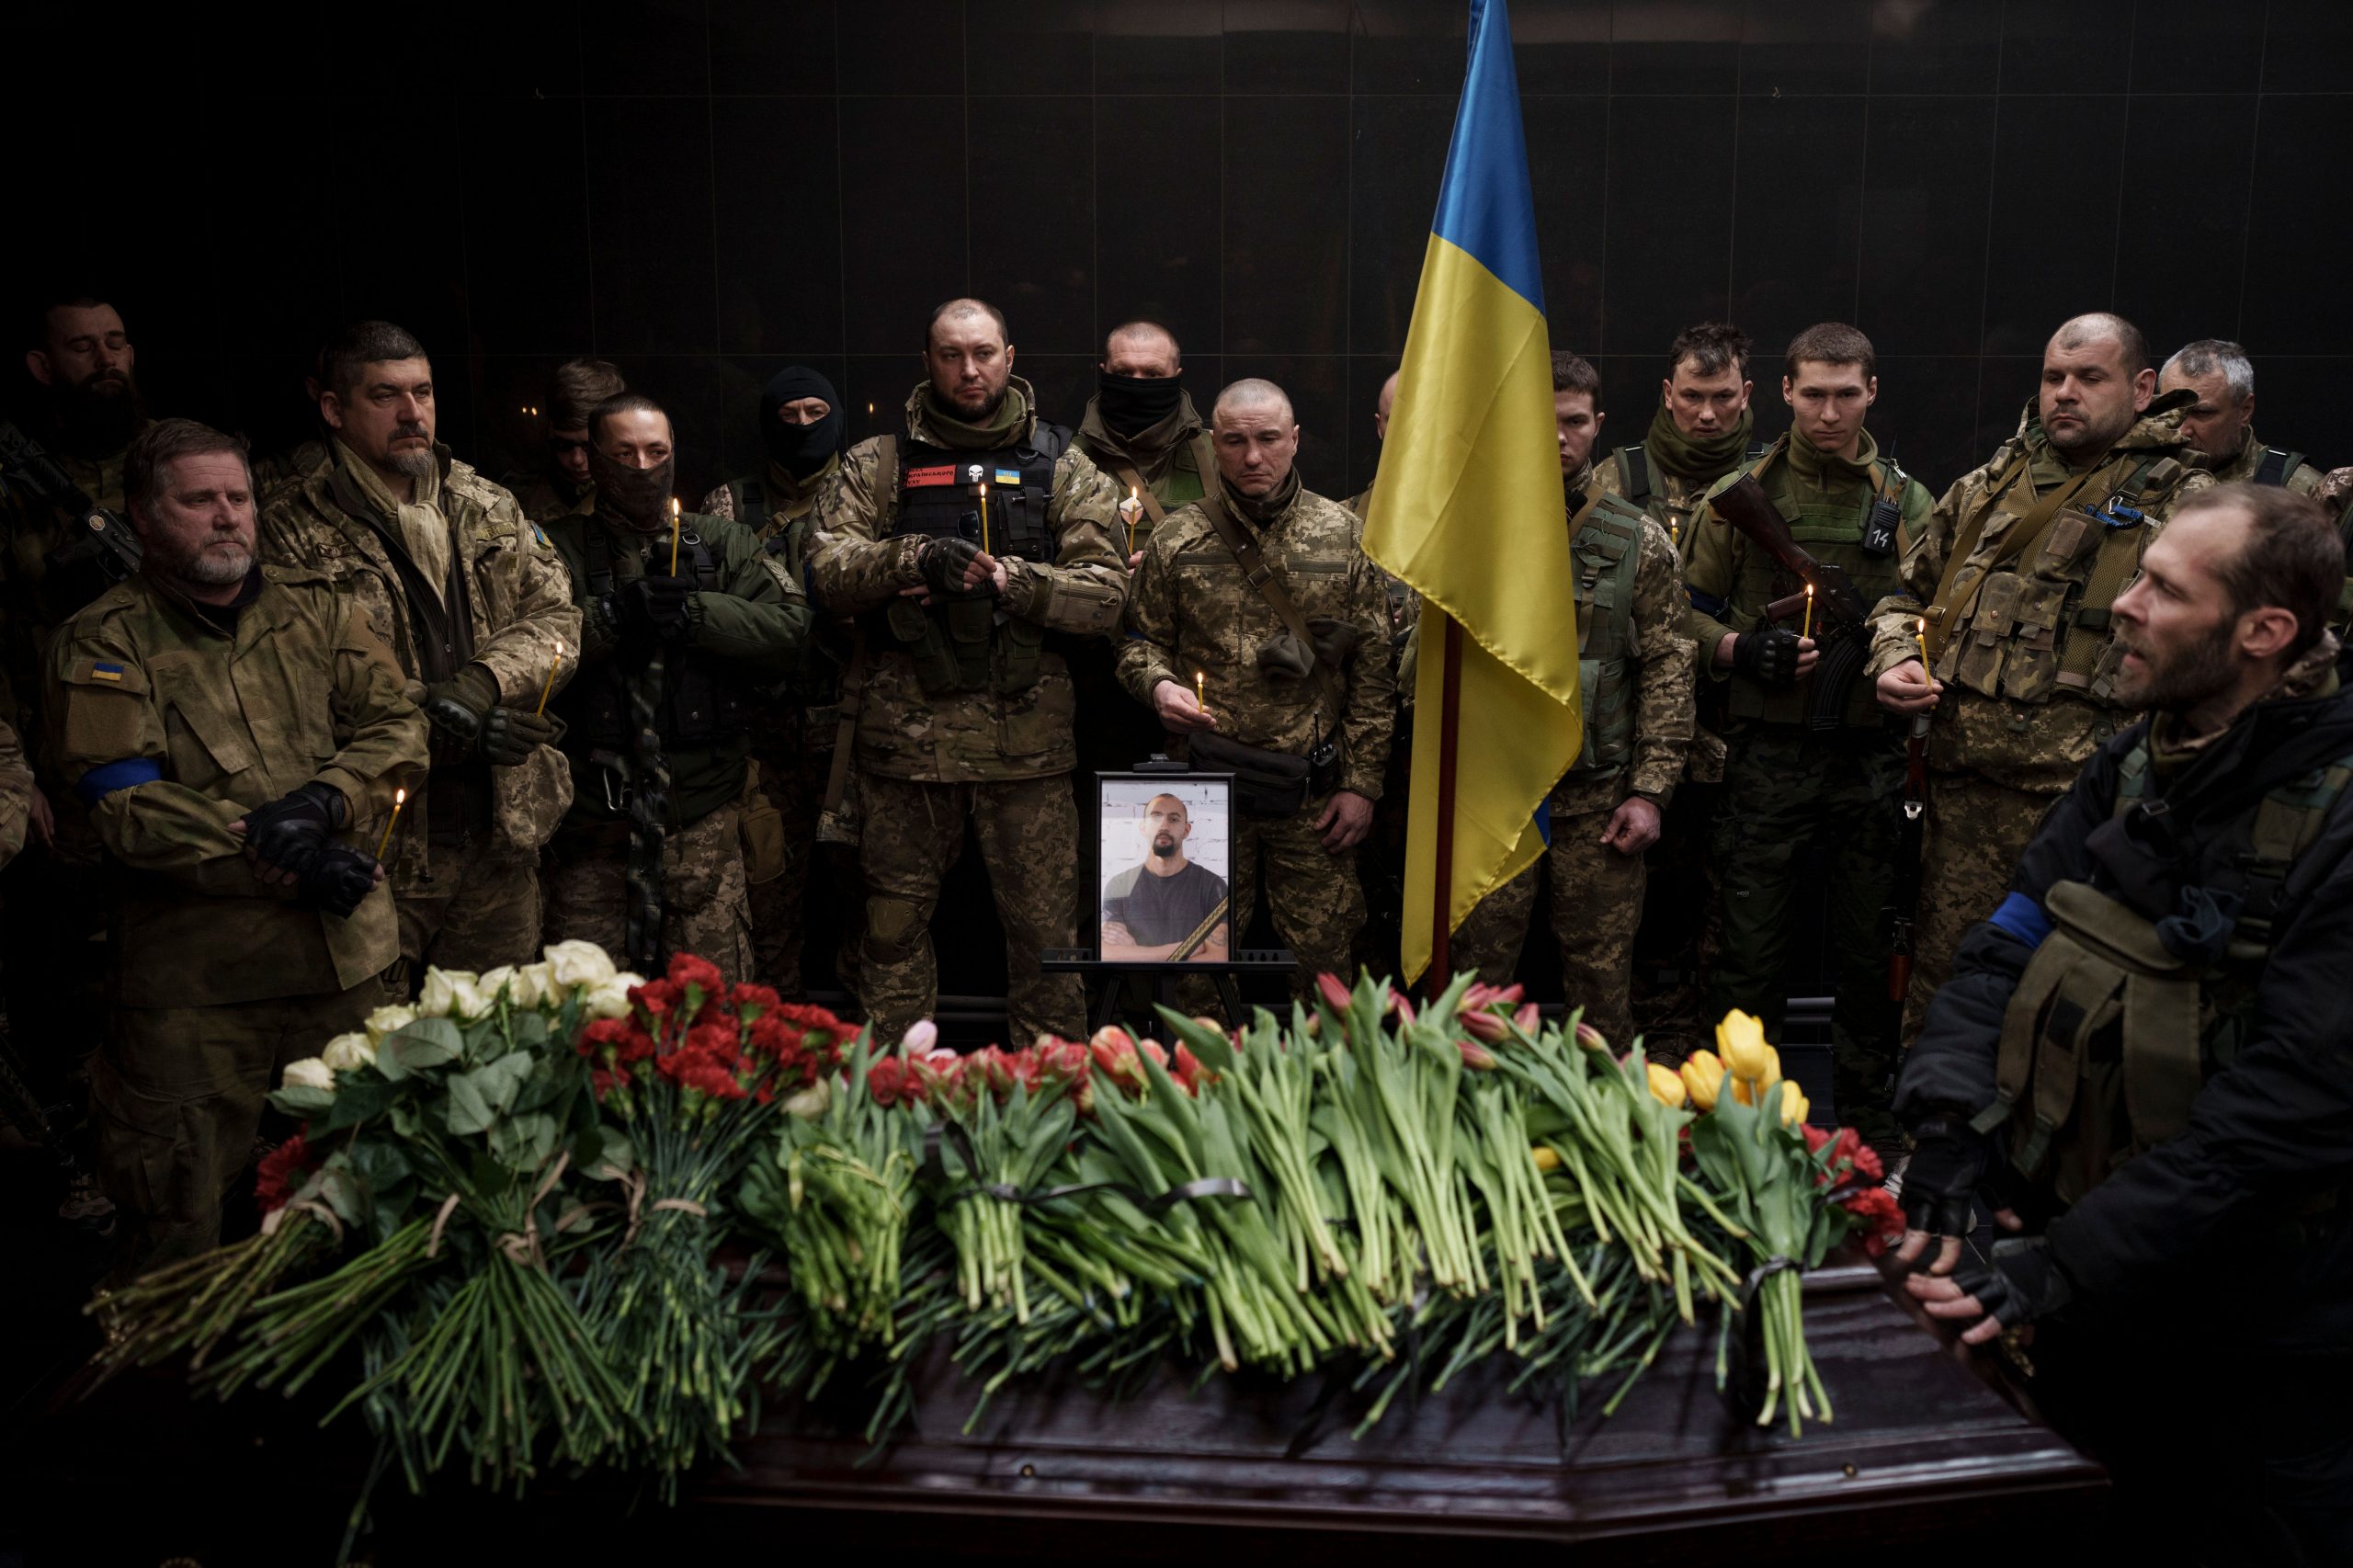 Amid new bombings, Ukraine now seen as a war of attrition